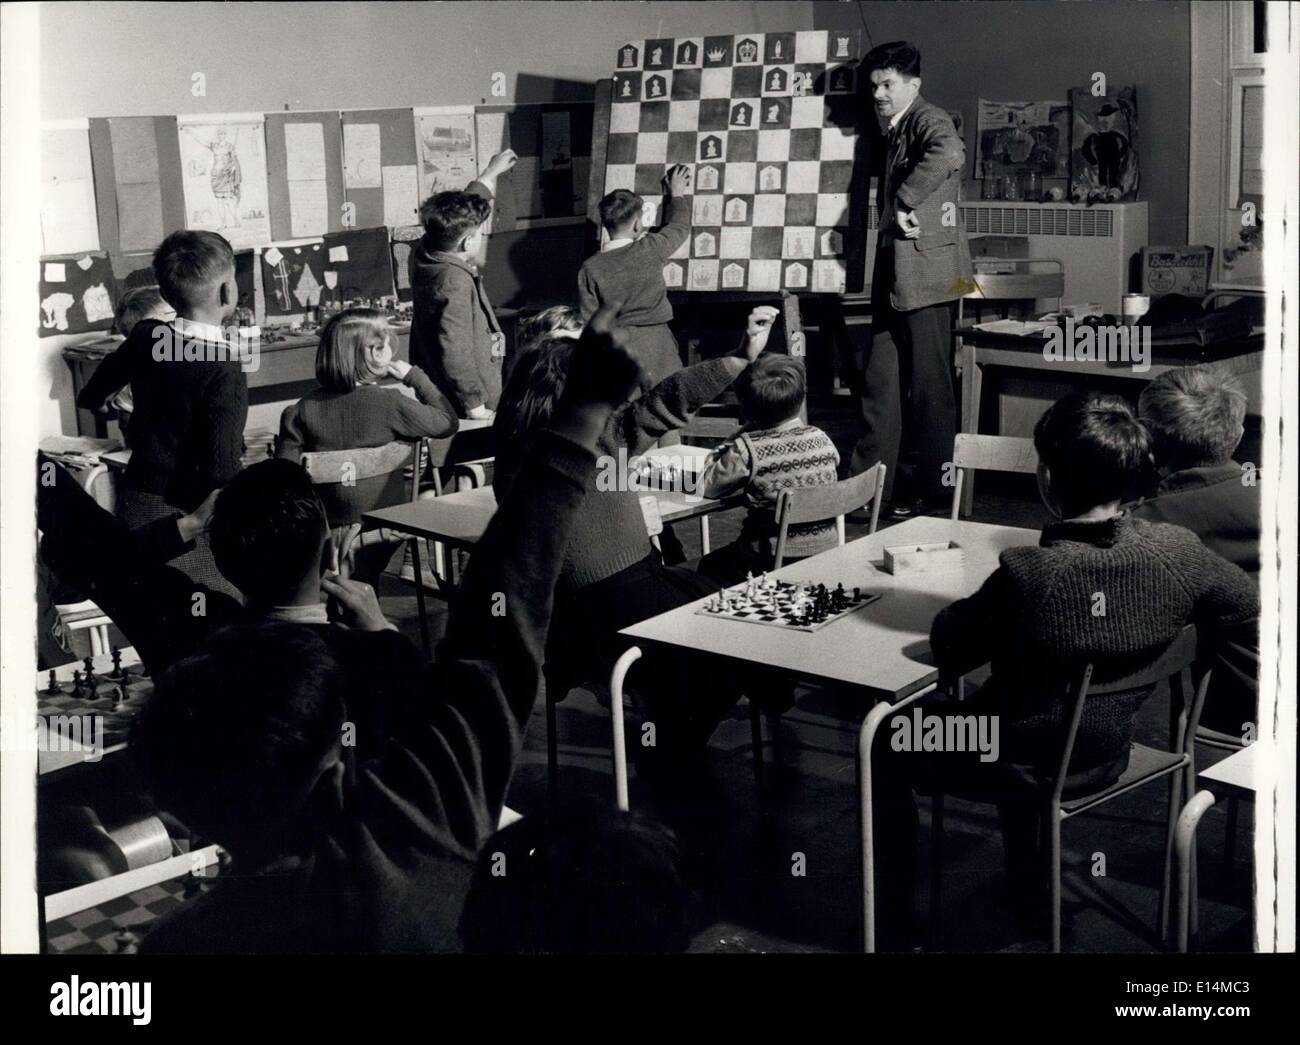 Apr. 05, 2012 - Chess For School Children: A Class In Progress: A chess class at the Langbourne Primary School, with the teacher, Mr. Ray Bott, demonstrating a good move using a blackboard chessboard, and child participation. Stock Photo